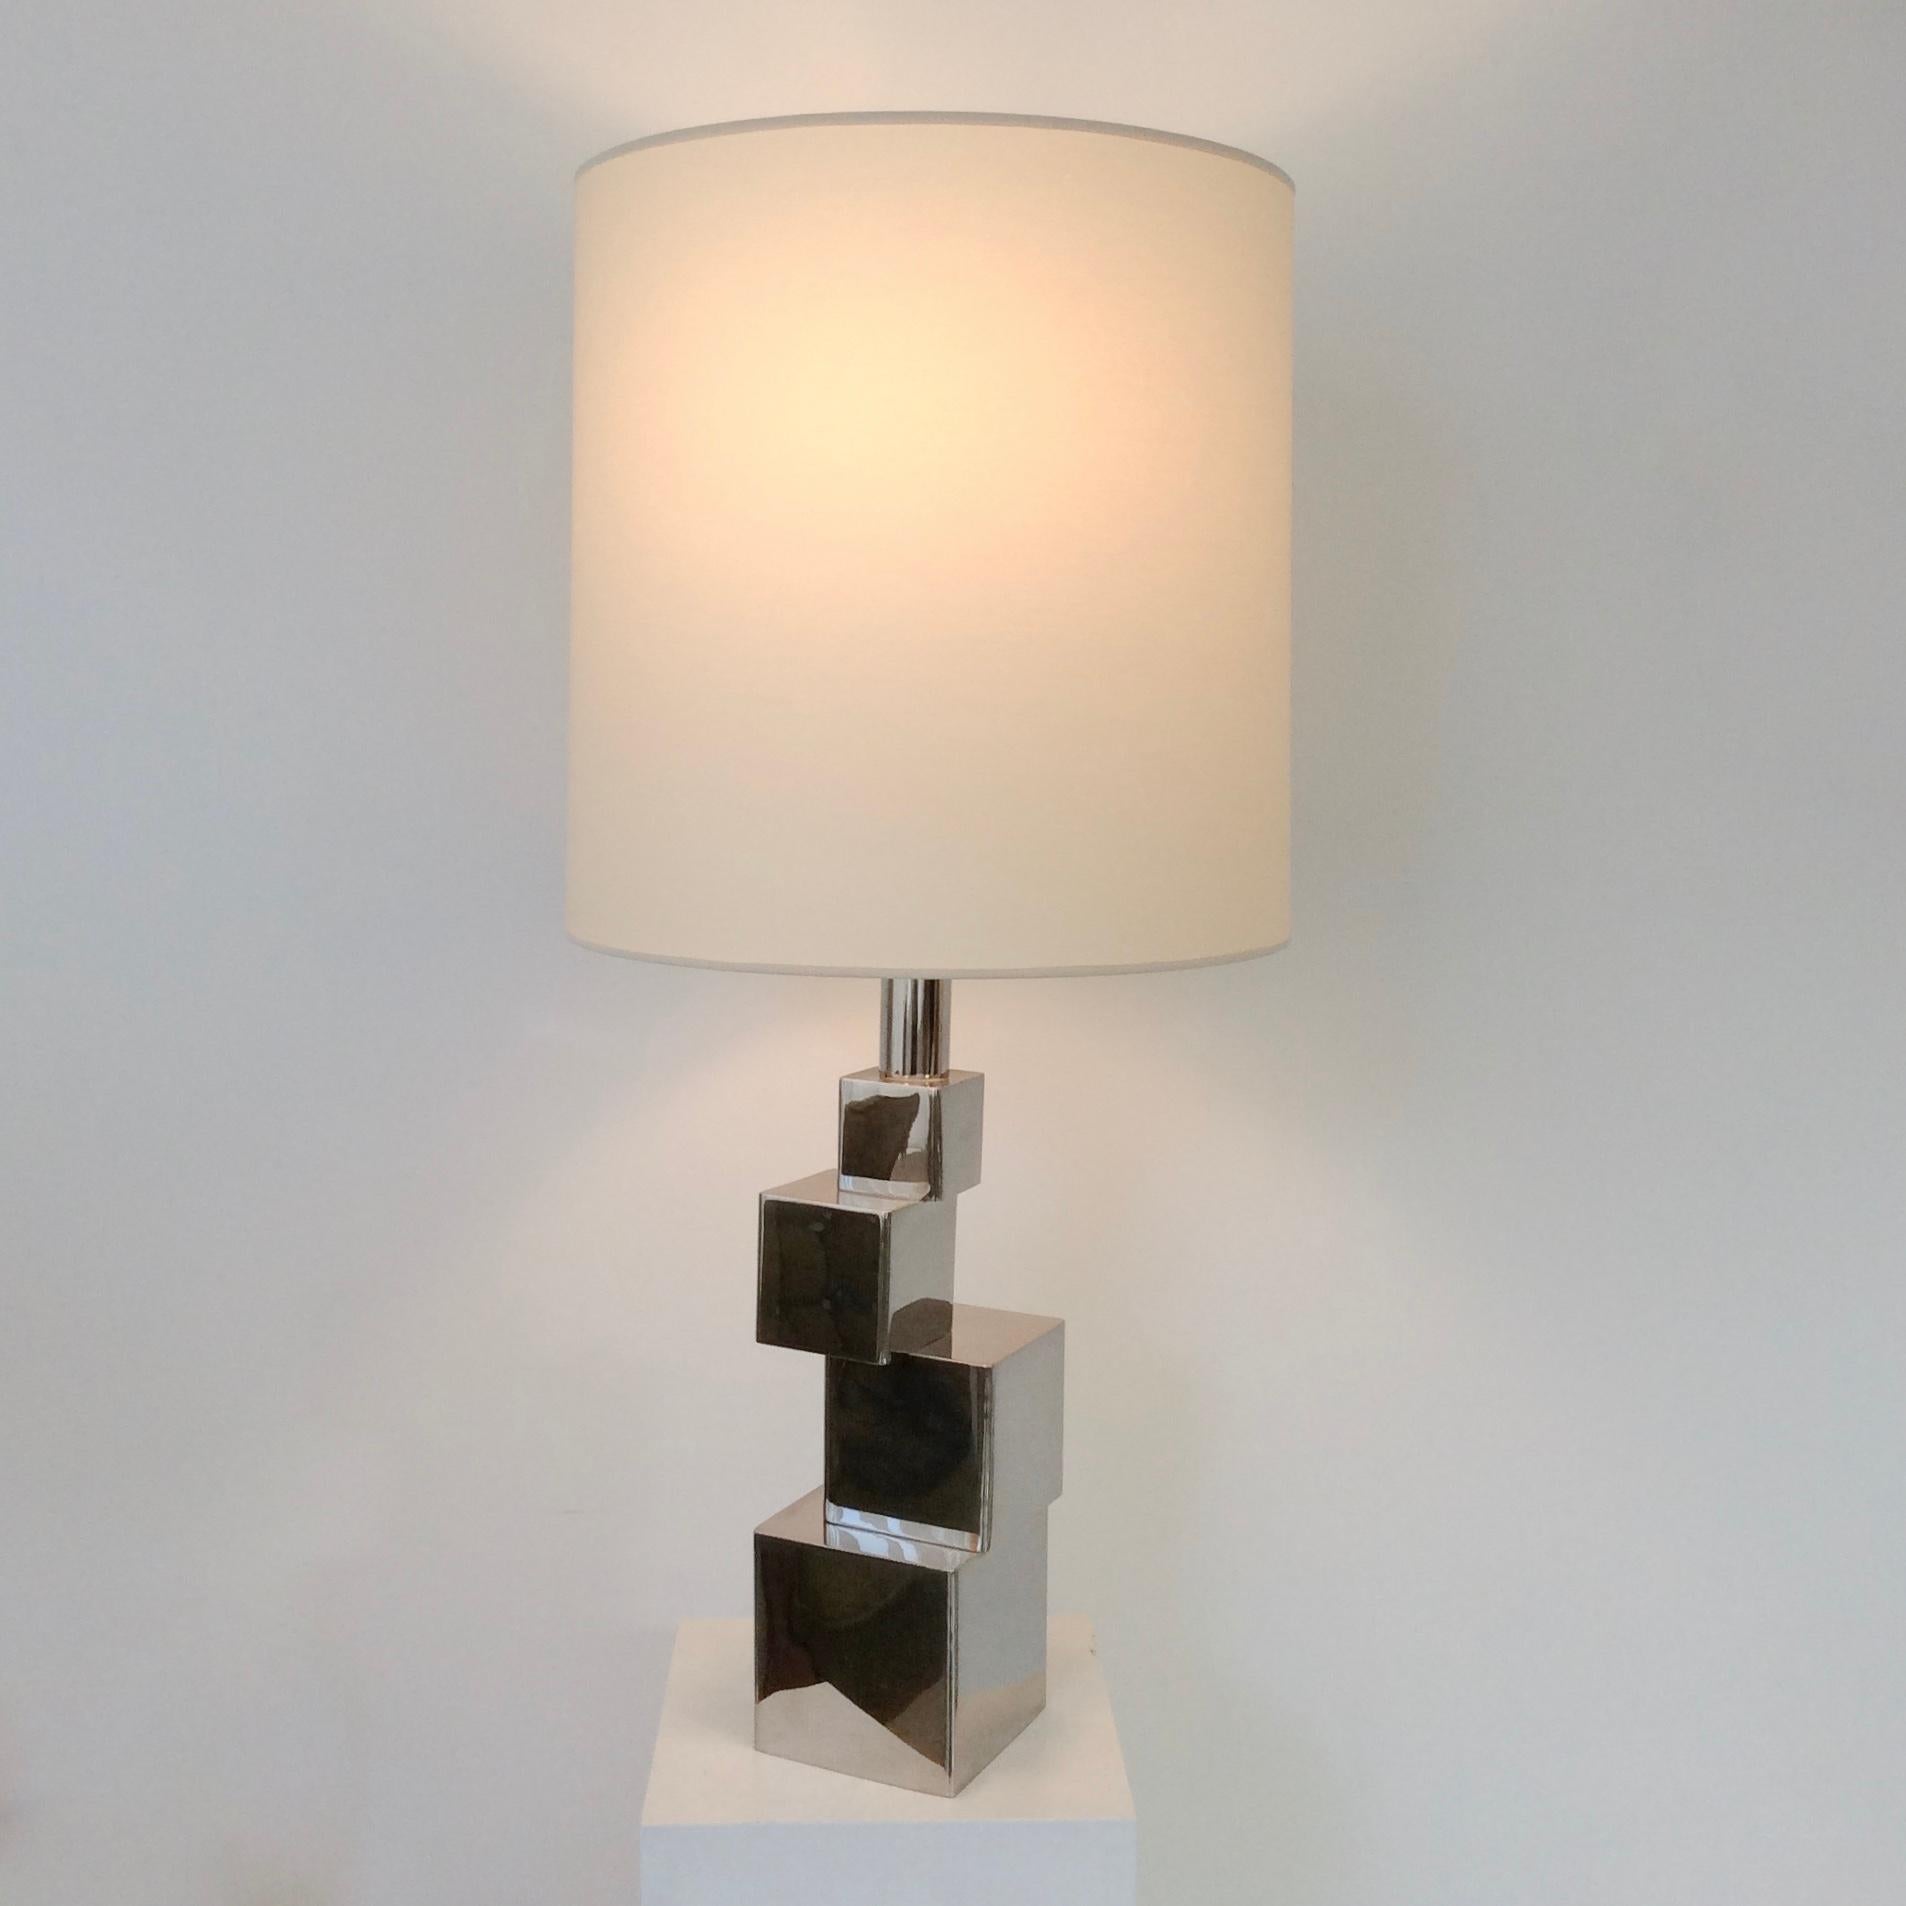 Sculptural geometric table lamp, circa 1970, France.
Chromed metal, new ivory fabric shade.
Dimensions: 82 cm H, diameter of the shade: 38 cm, base: 12 x 12 cm.
Good condition.
 